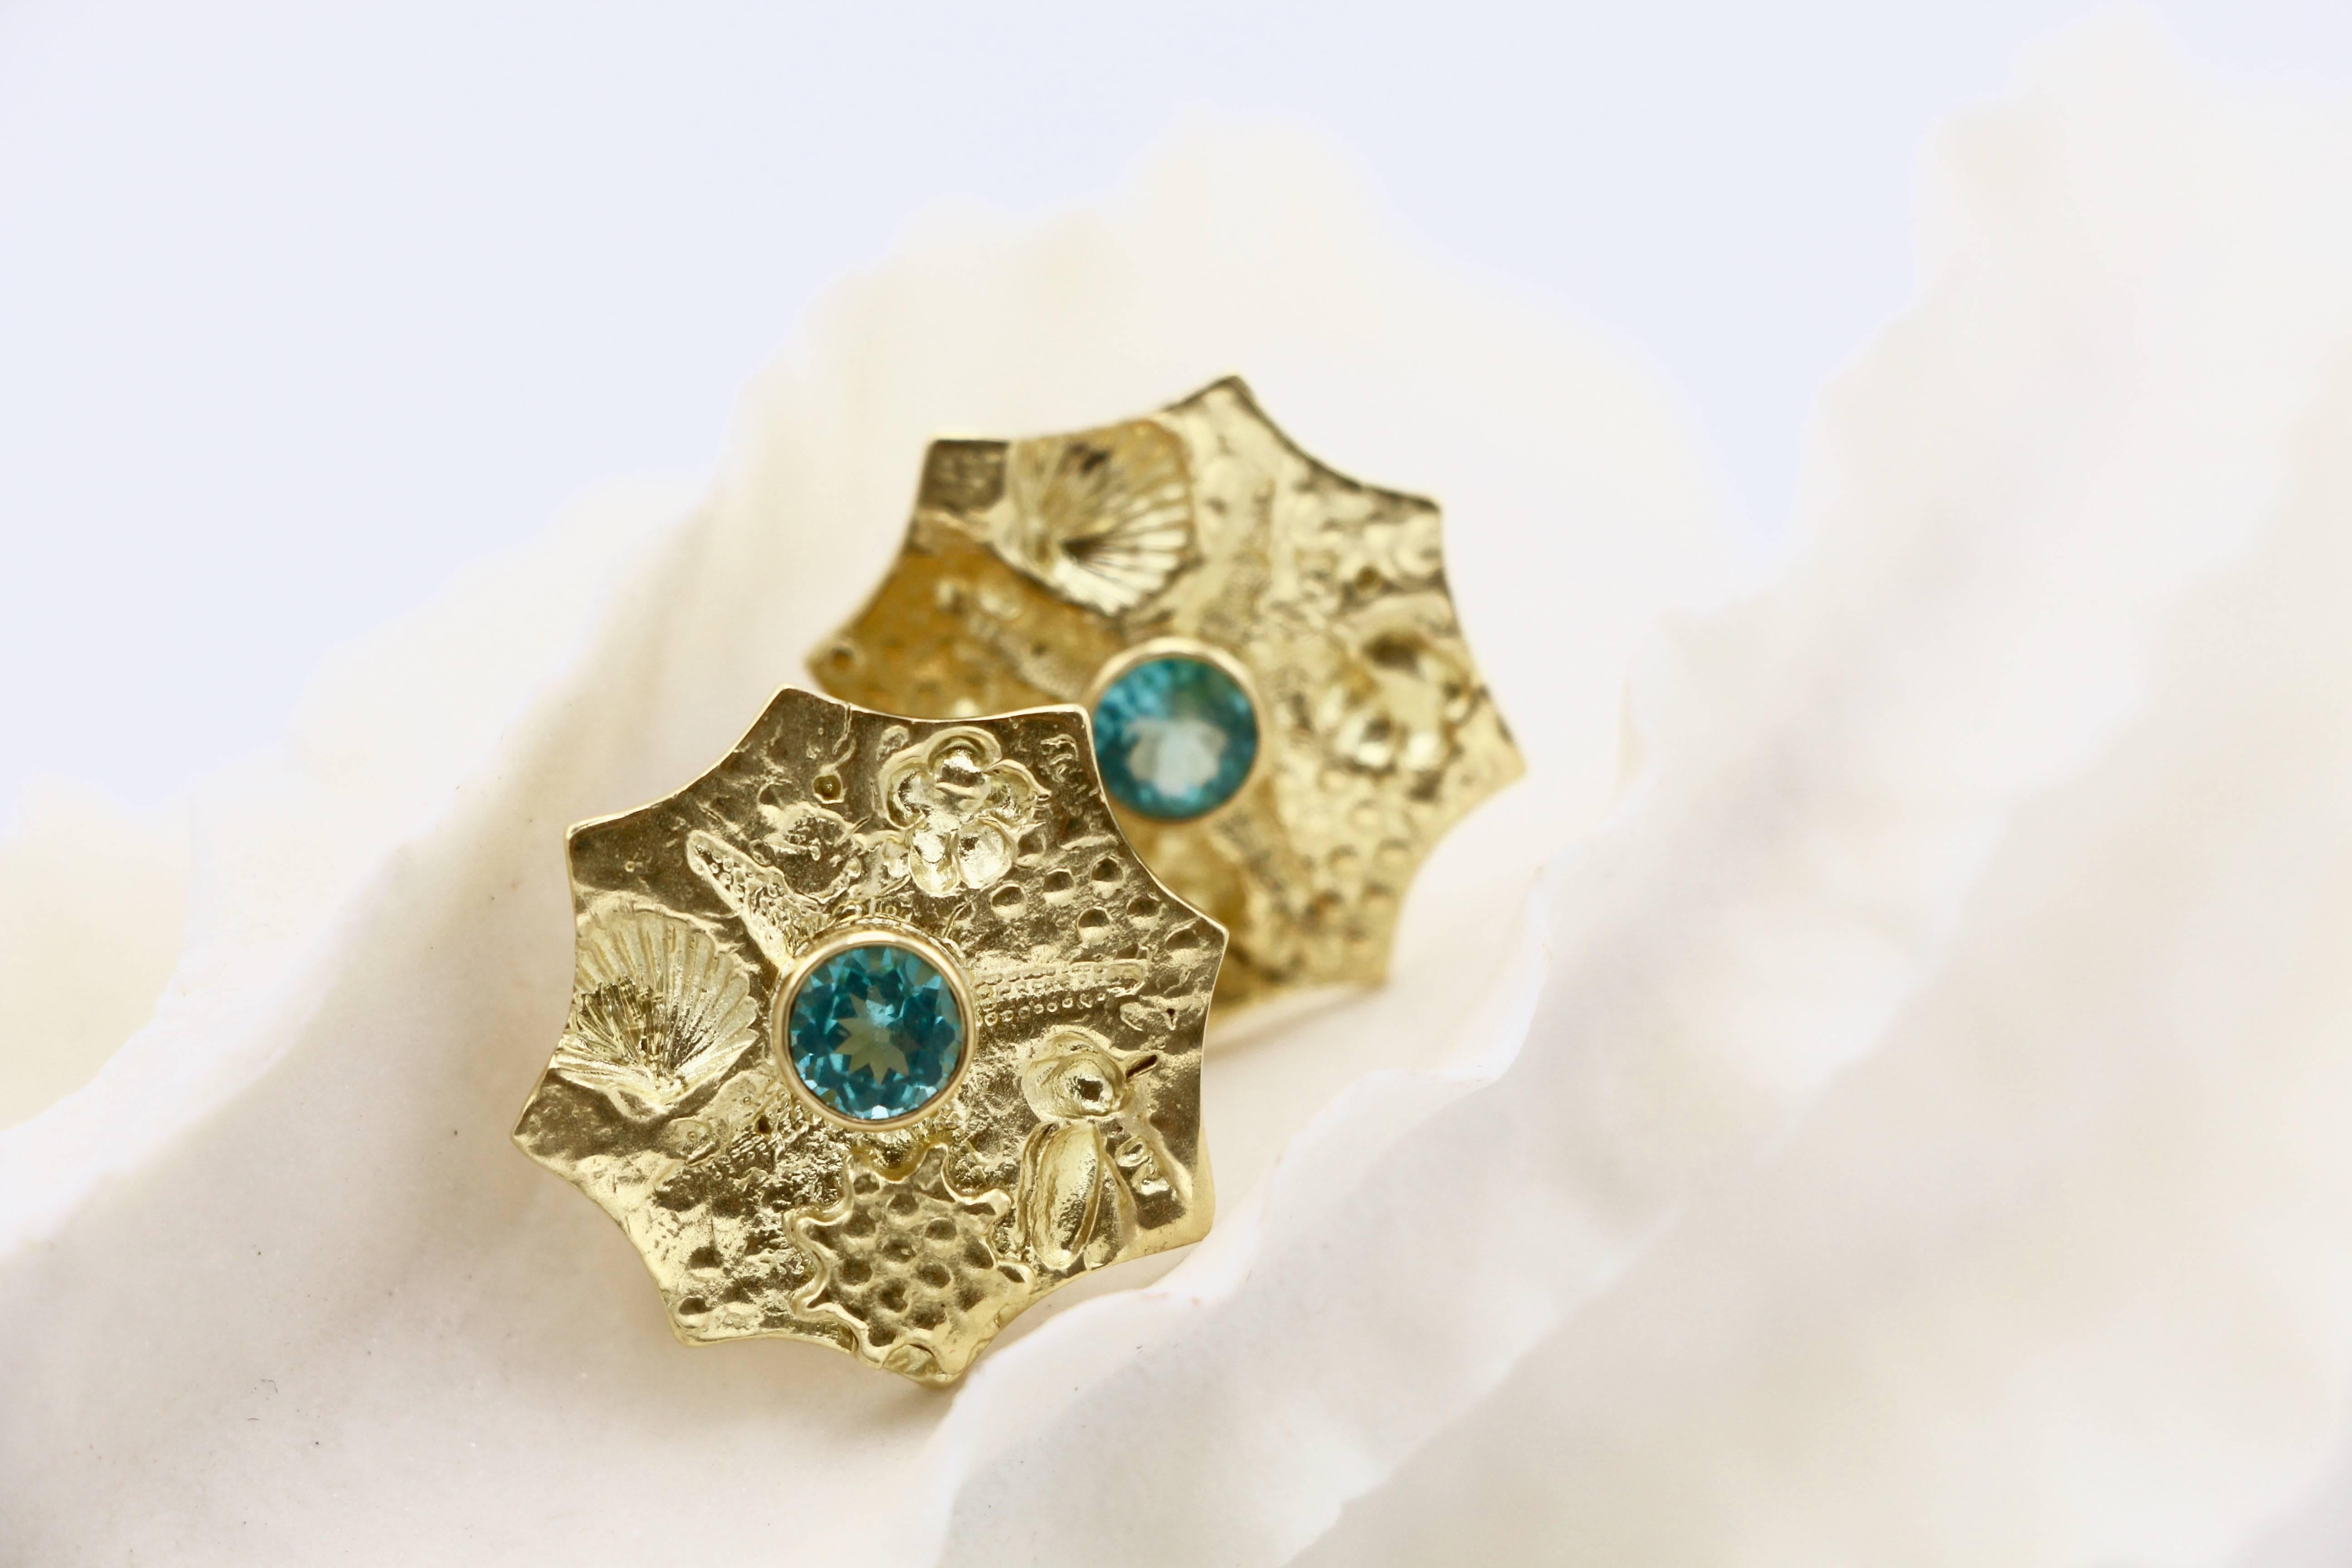 These beautiful blue Apatite gemstones, set in 18 Karat Gold, are inspired by the ocean, and can be a perfect everyday earring or special gift.